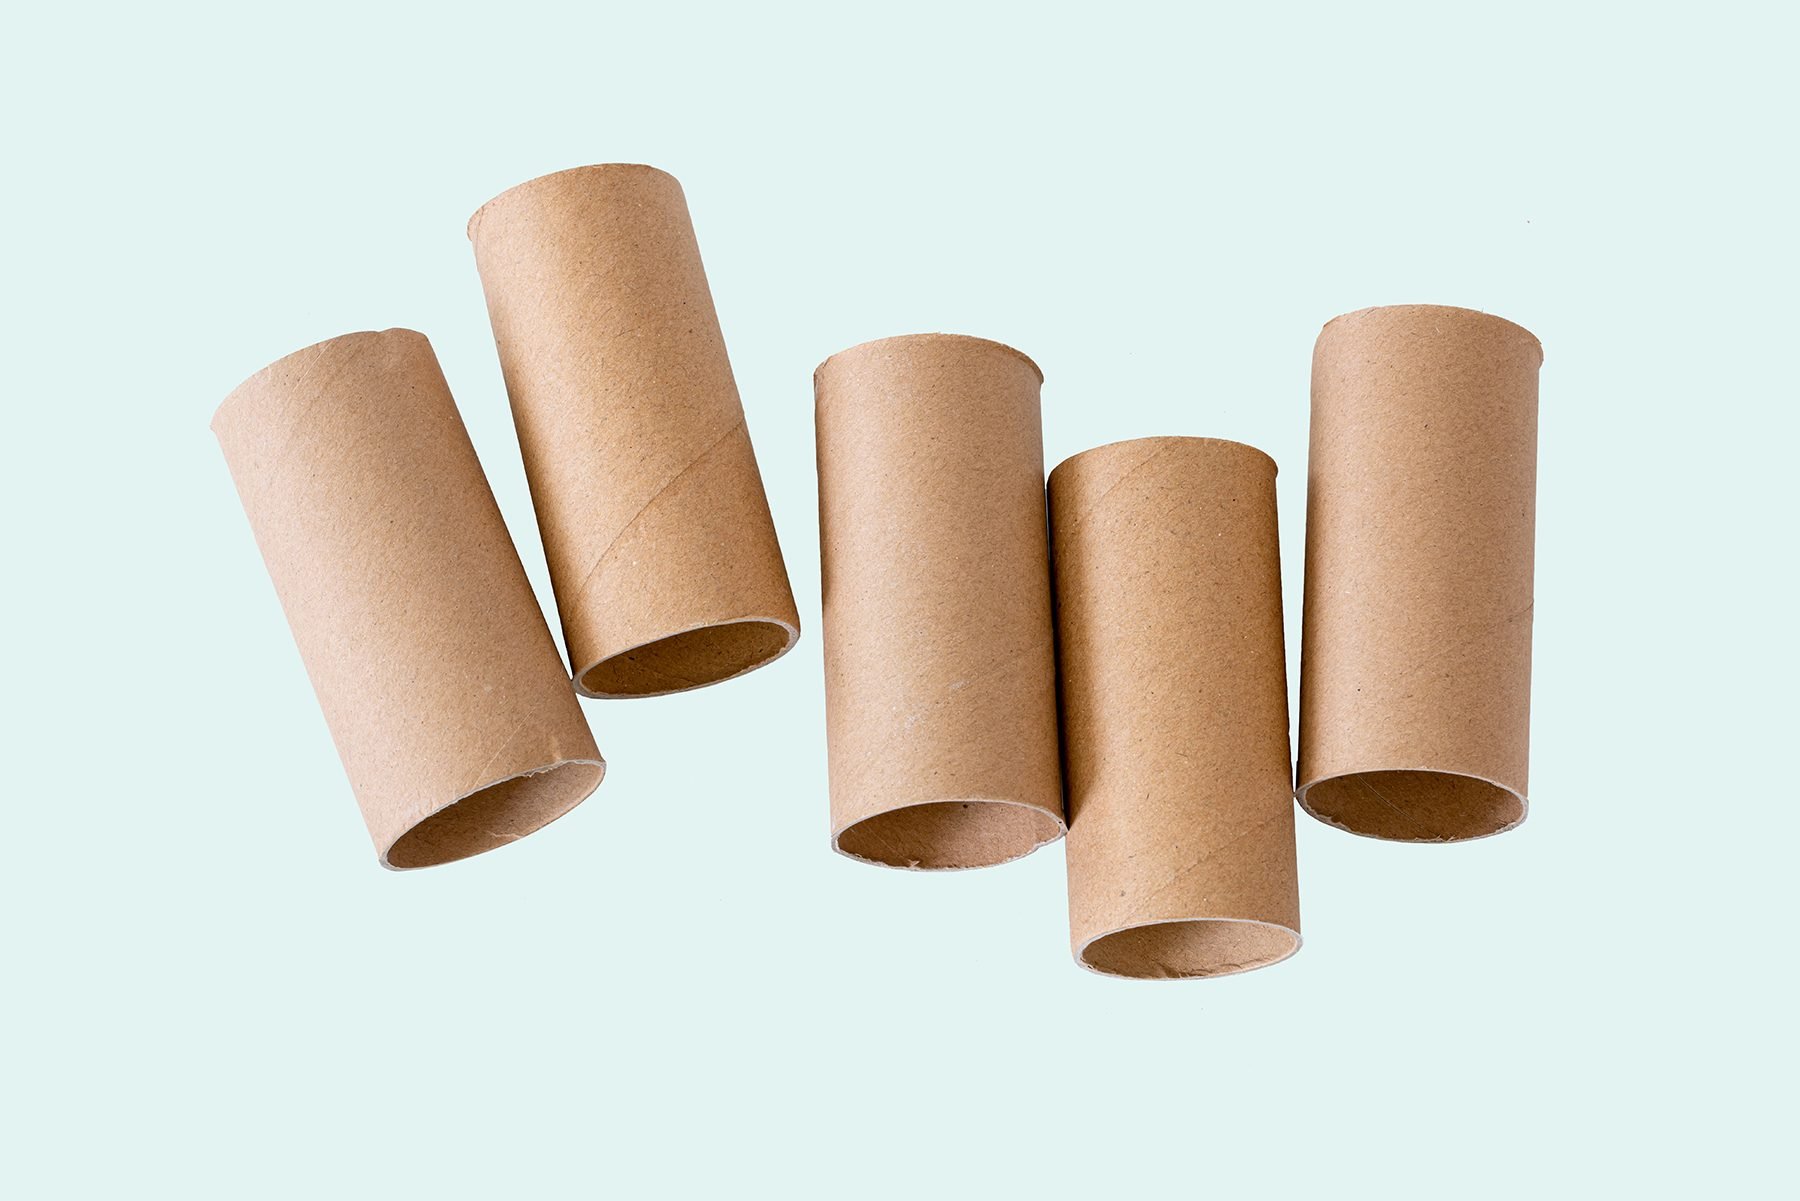 Cardboard Tube Craft Ideas for Toddlers - My Bored Toddler